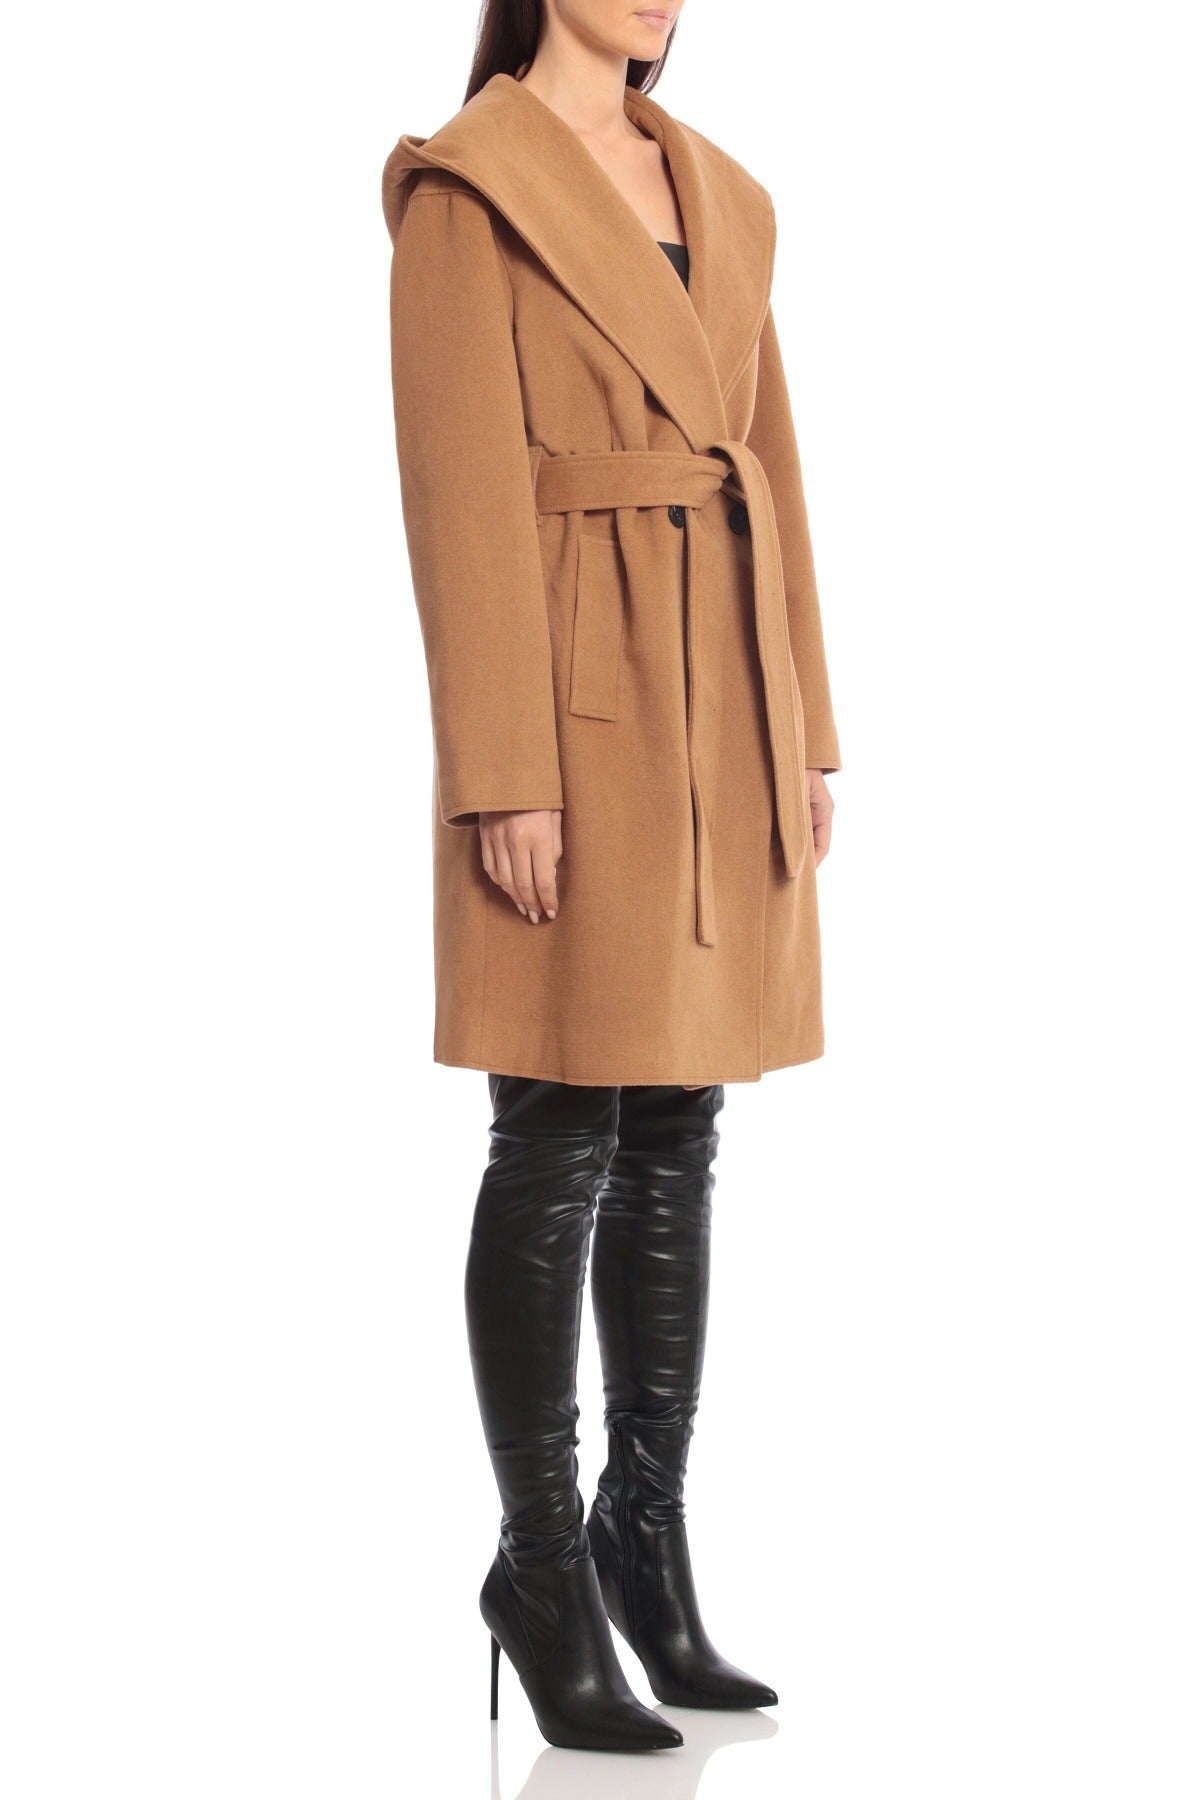 Brown hooded wool-blend belted midi coat jacket - figure flattering day to night coats jackets for ladies by Avec Les Filles